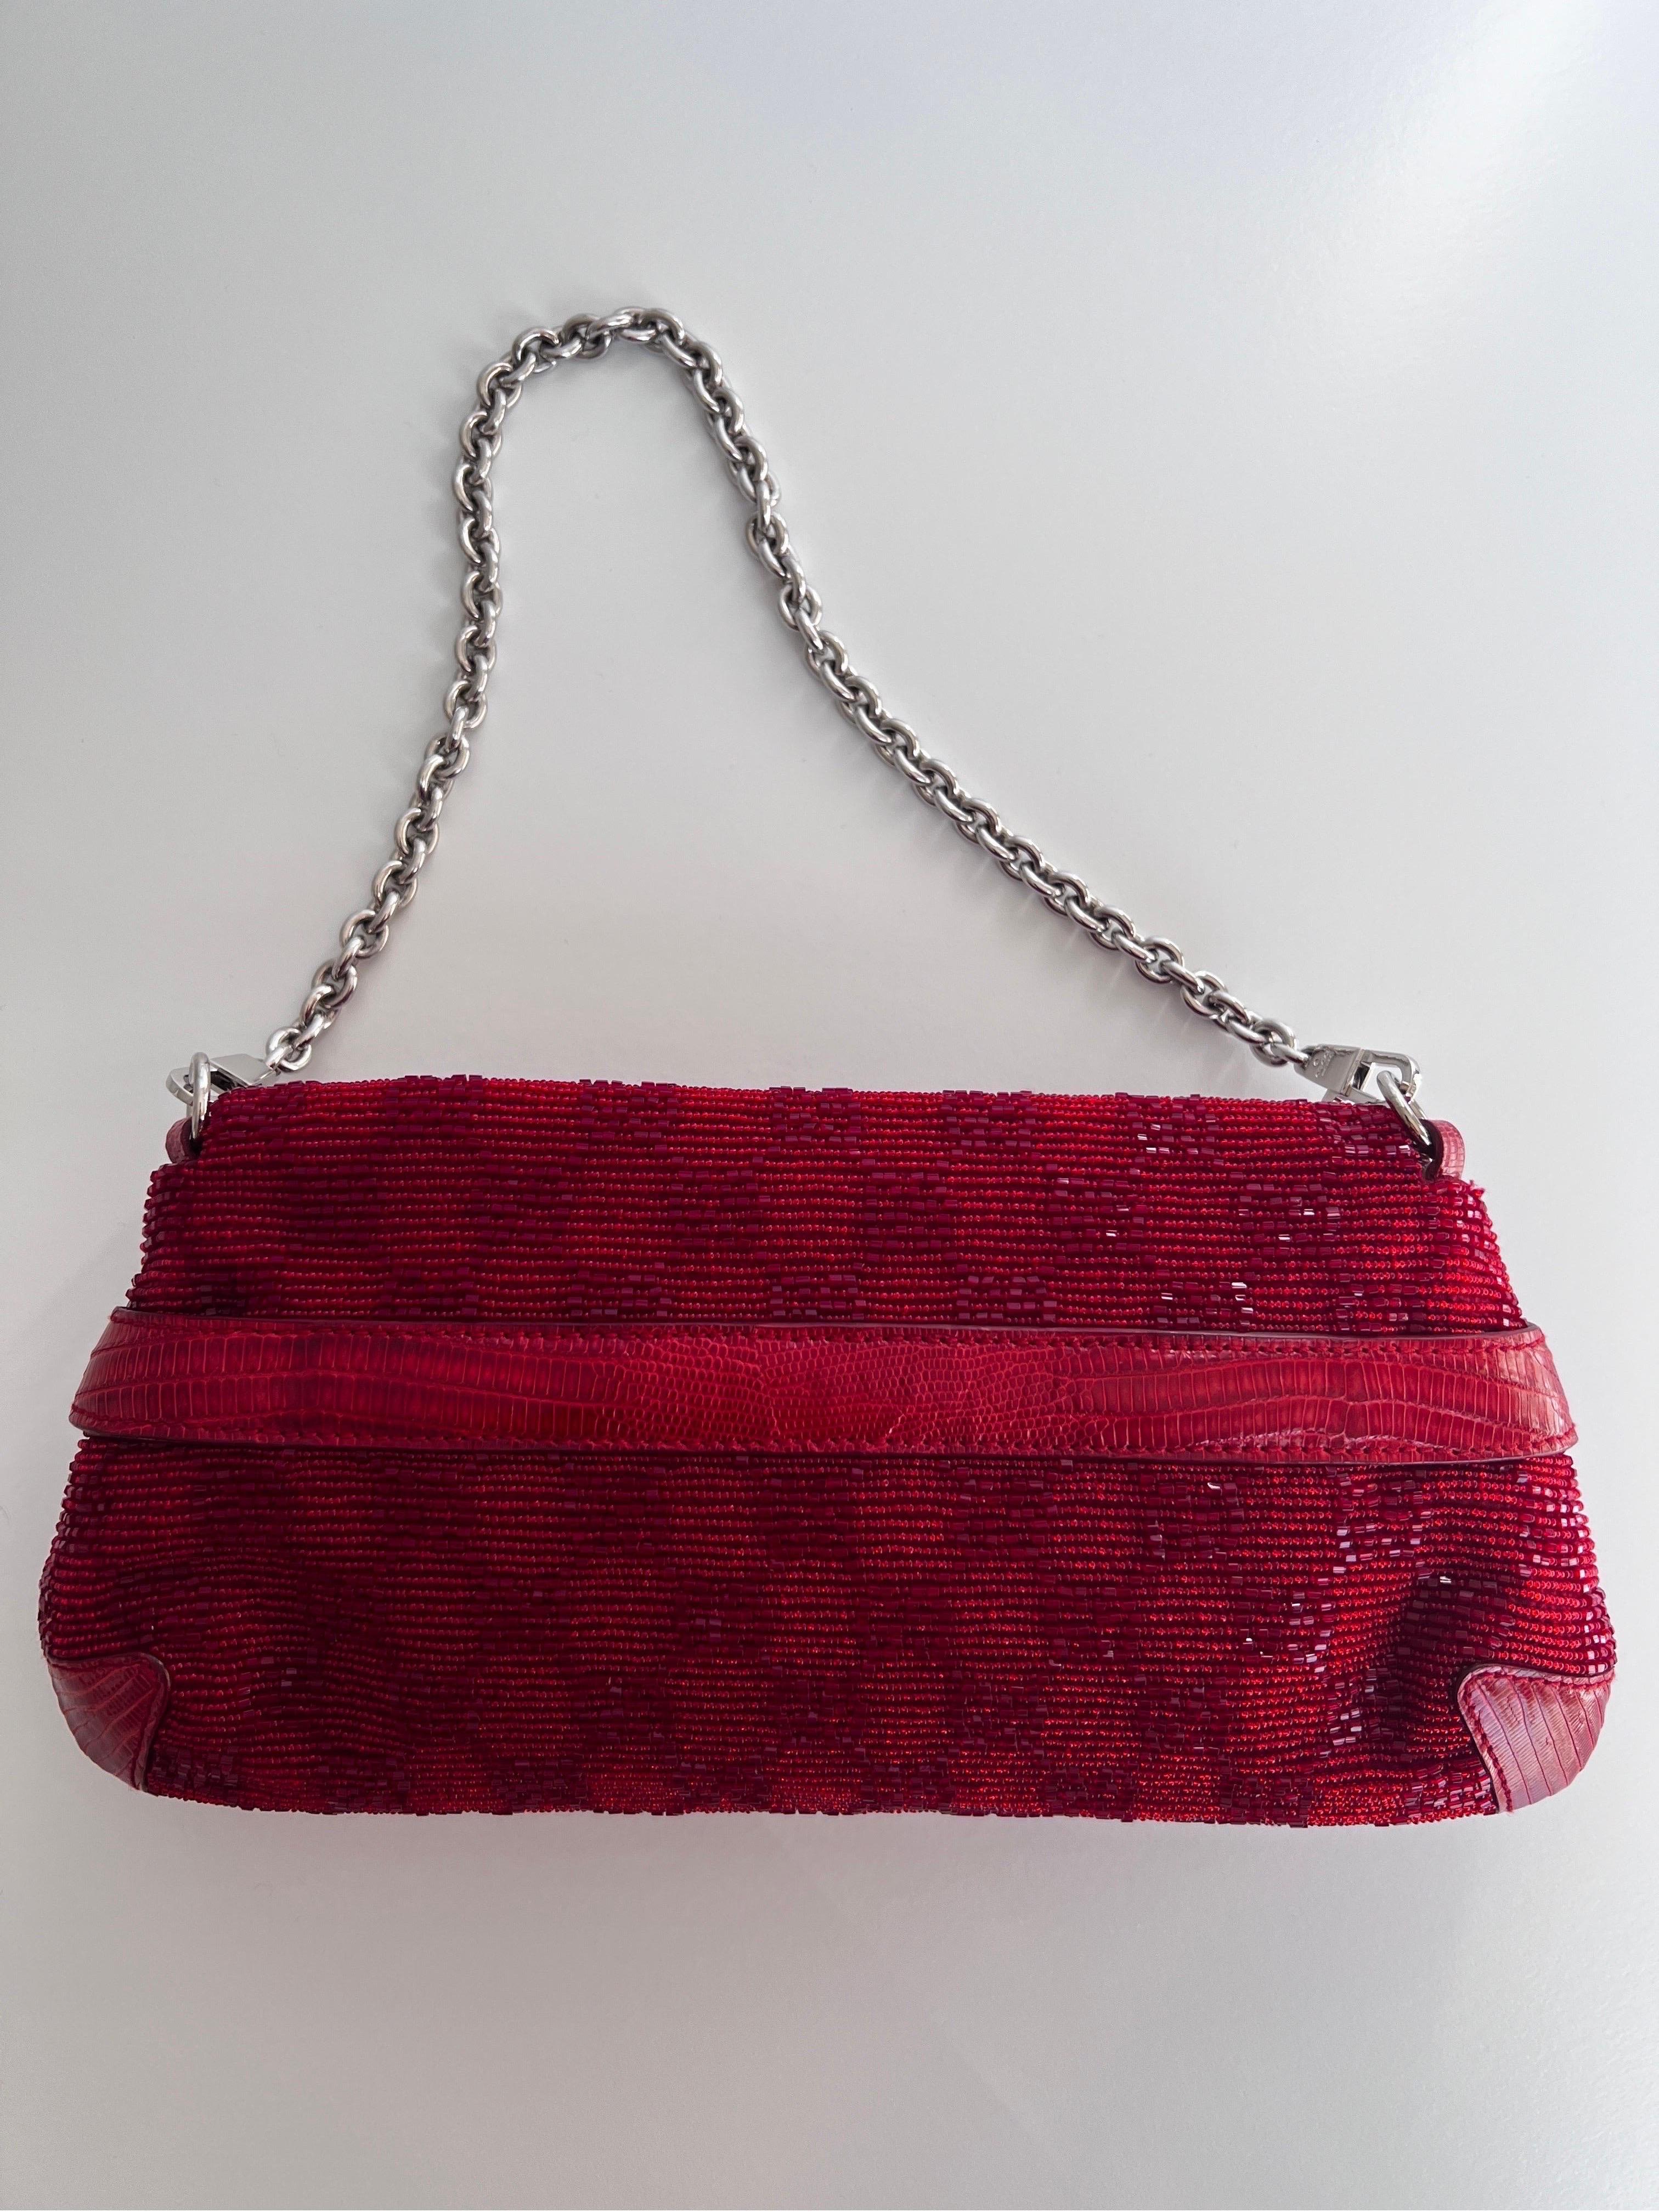 Gucci red beaded horsebit chain bag
Very good condition 
No noticeable stains and flaws 
Very rare piece 